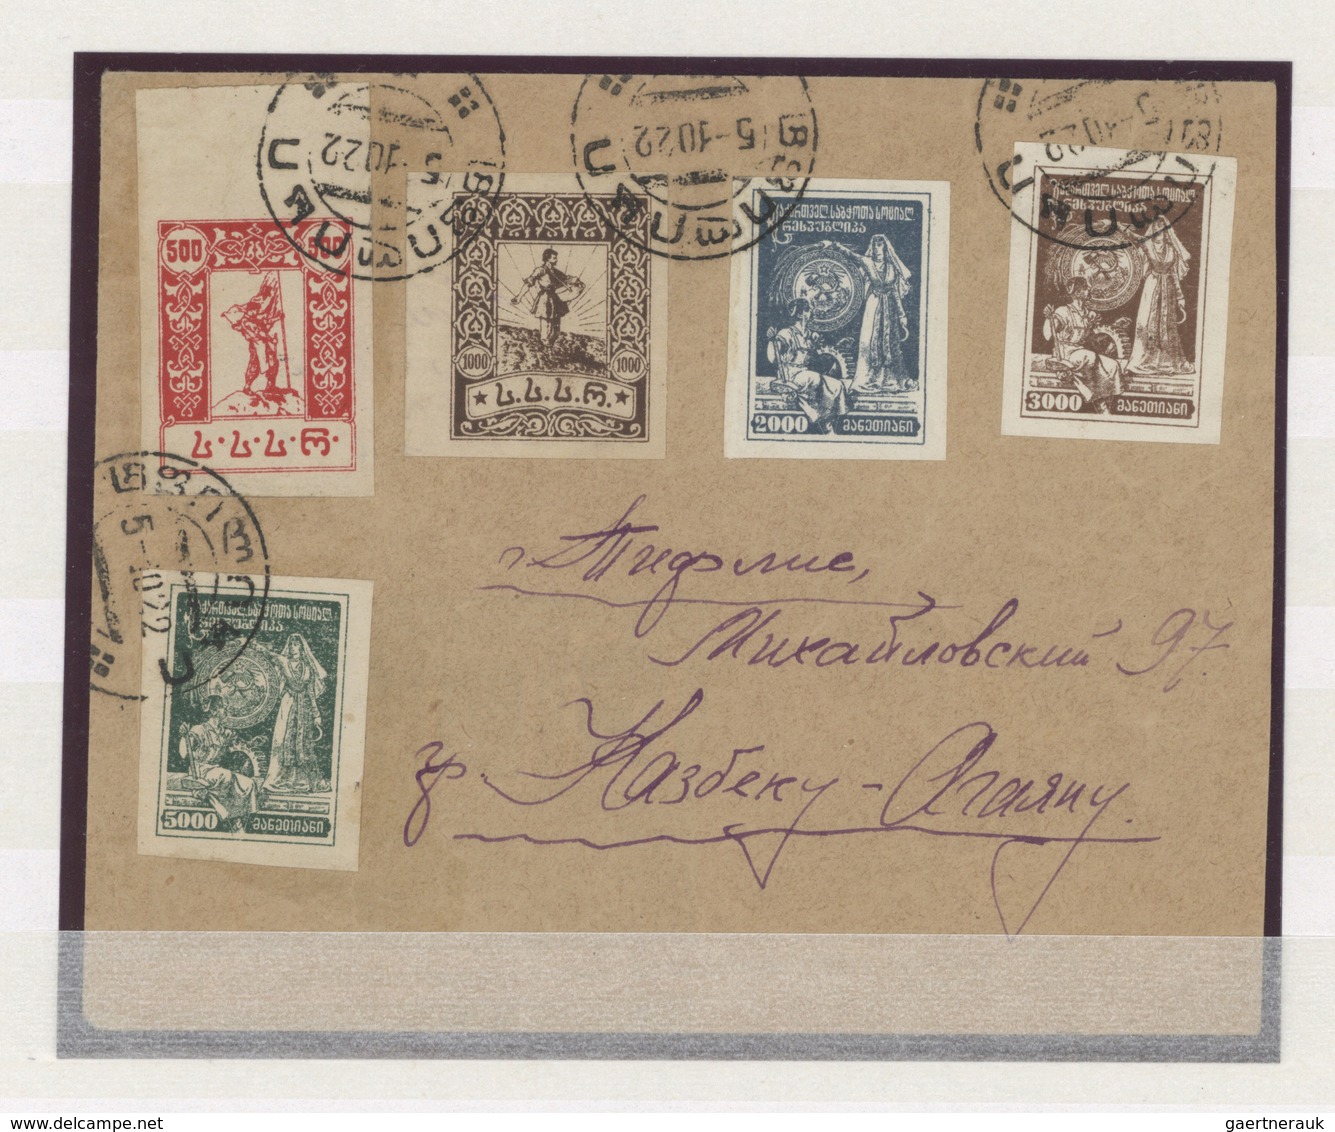 Br/GA/O Georgien: 1916-26: Postal history and stamp collection of 20 covers and about 80 stamps, with remark